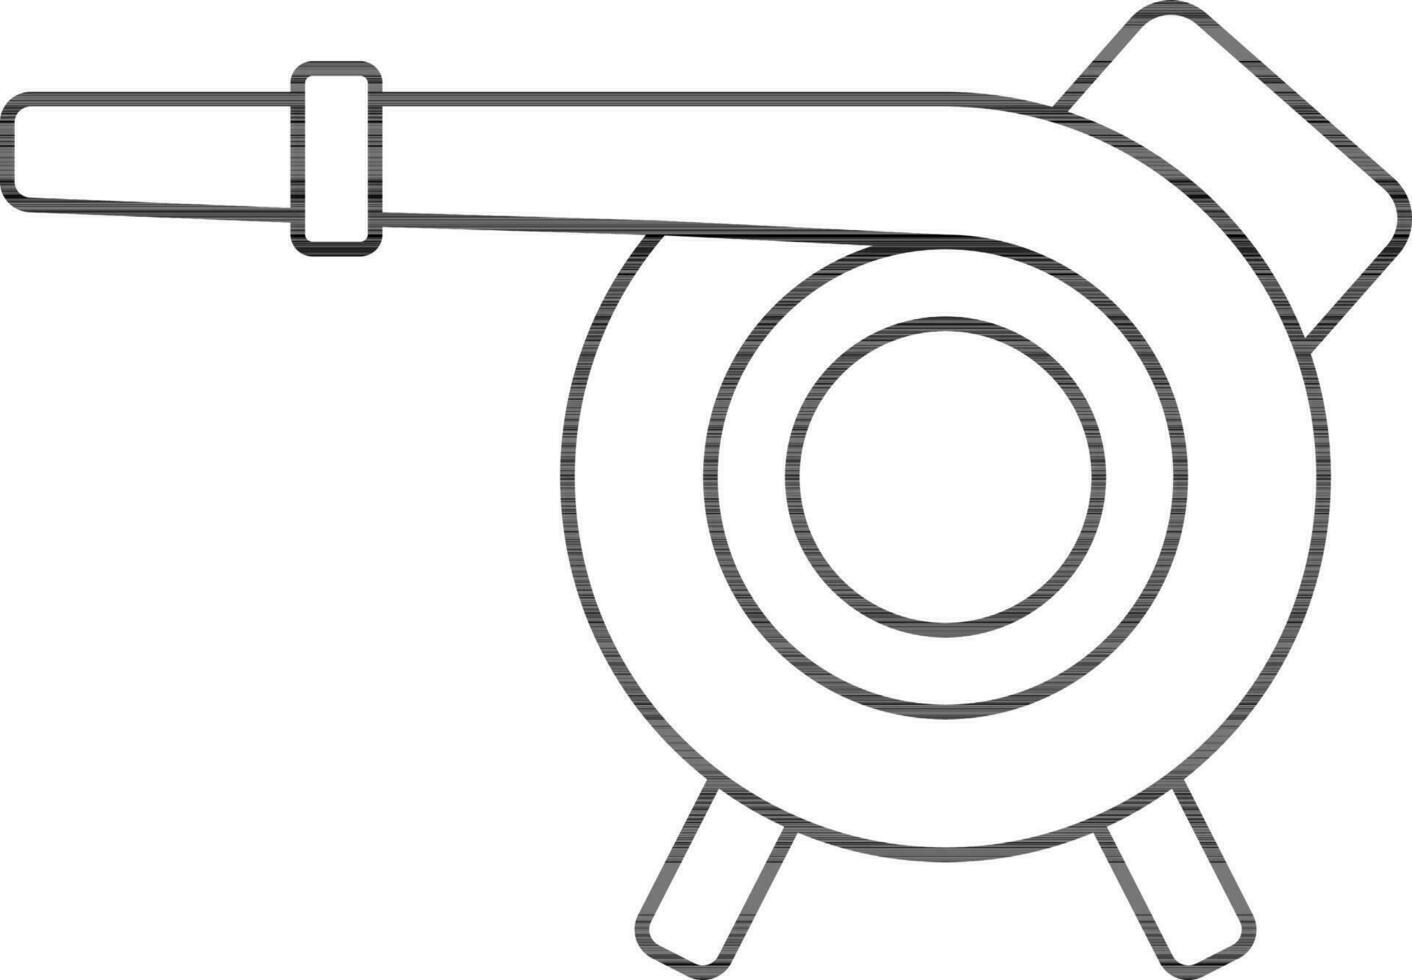 Blower Icon Or Symbol In Thin Line Art. vector